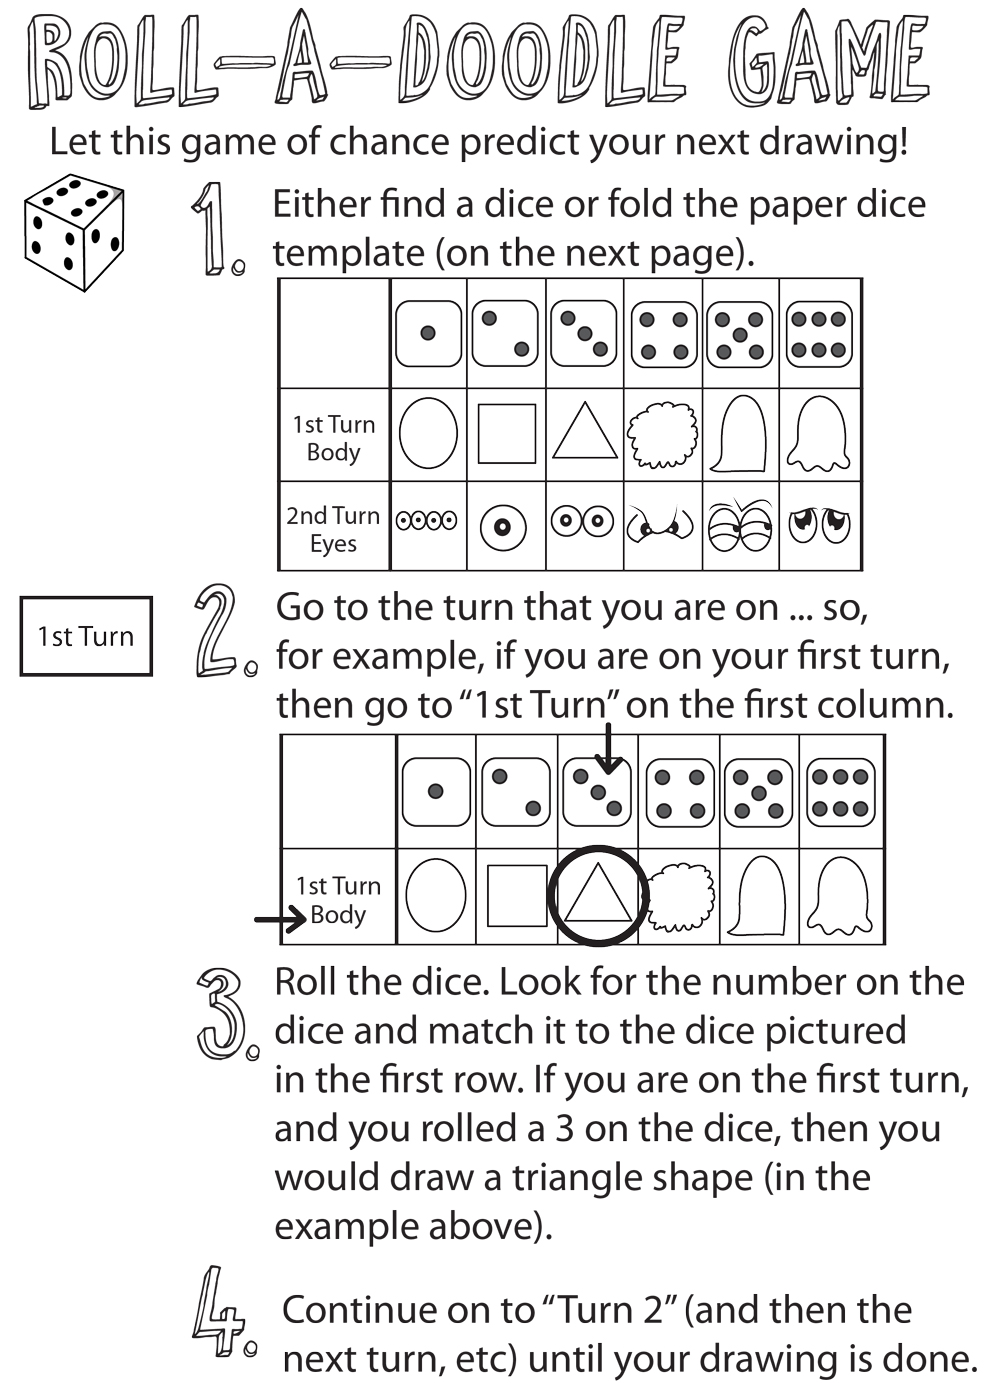 quick draw dice table game